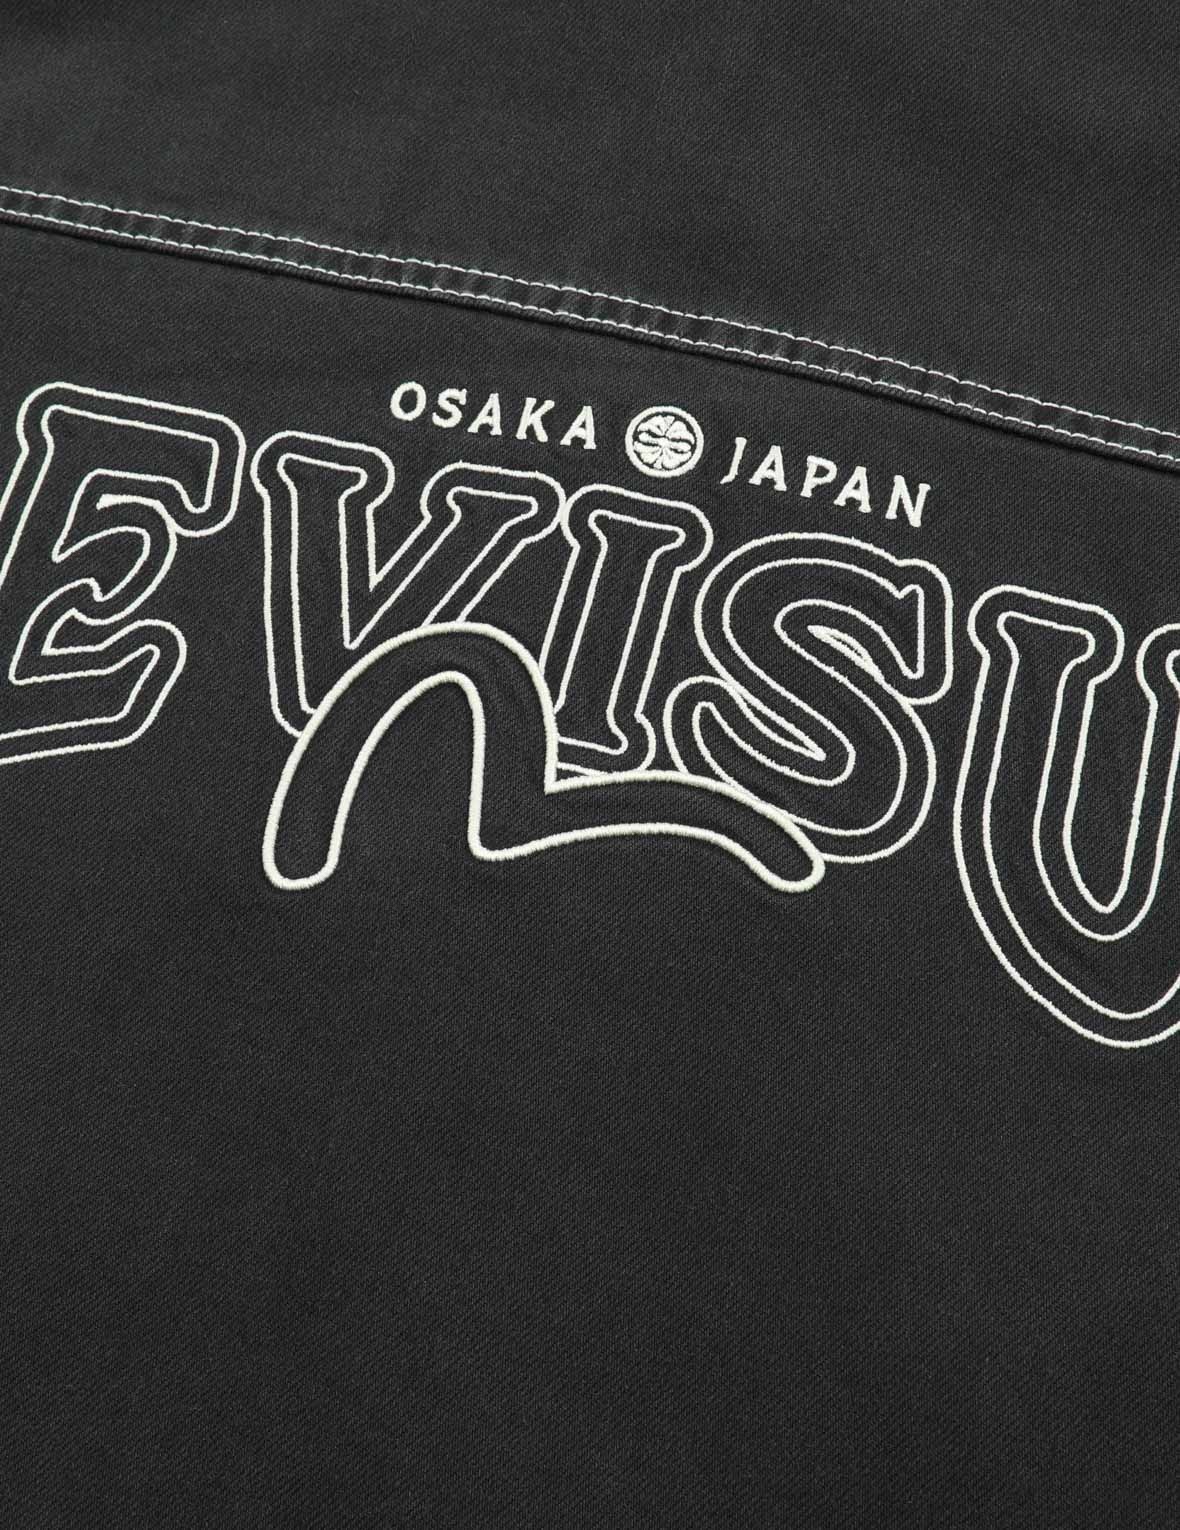 LOGO AND SEAGULL EMBROIDERY DENIM JACKET - 10